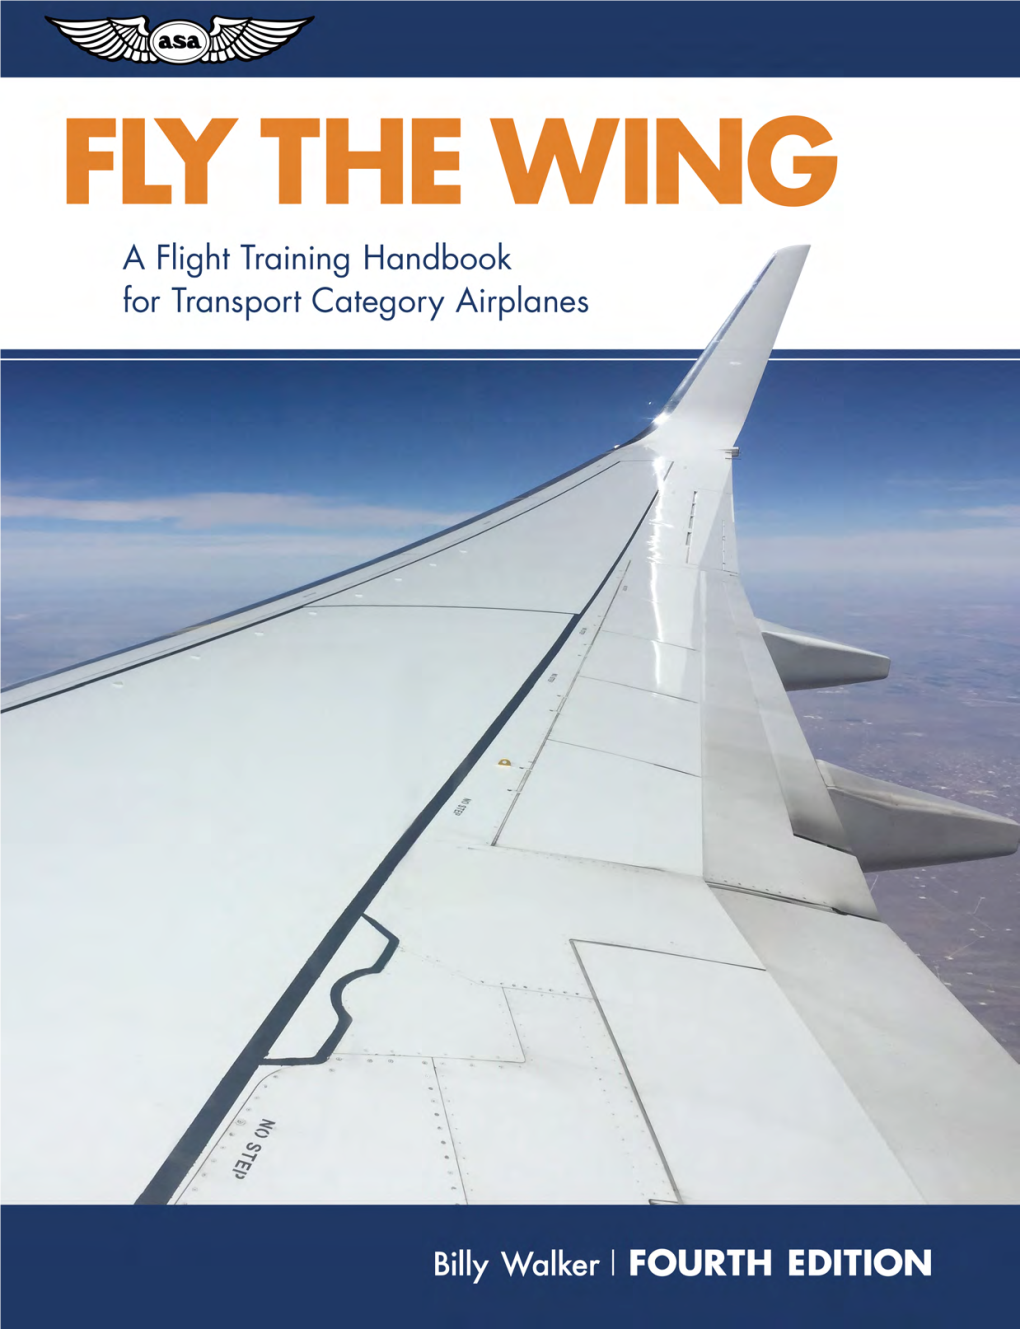 Fly the Wing: a Flight Training Handbook for Transport Category Airplanes Fourth Edition by William D